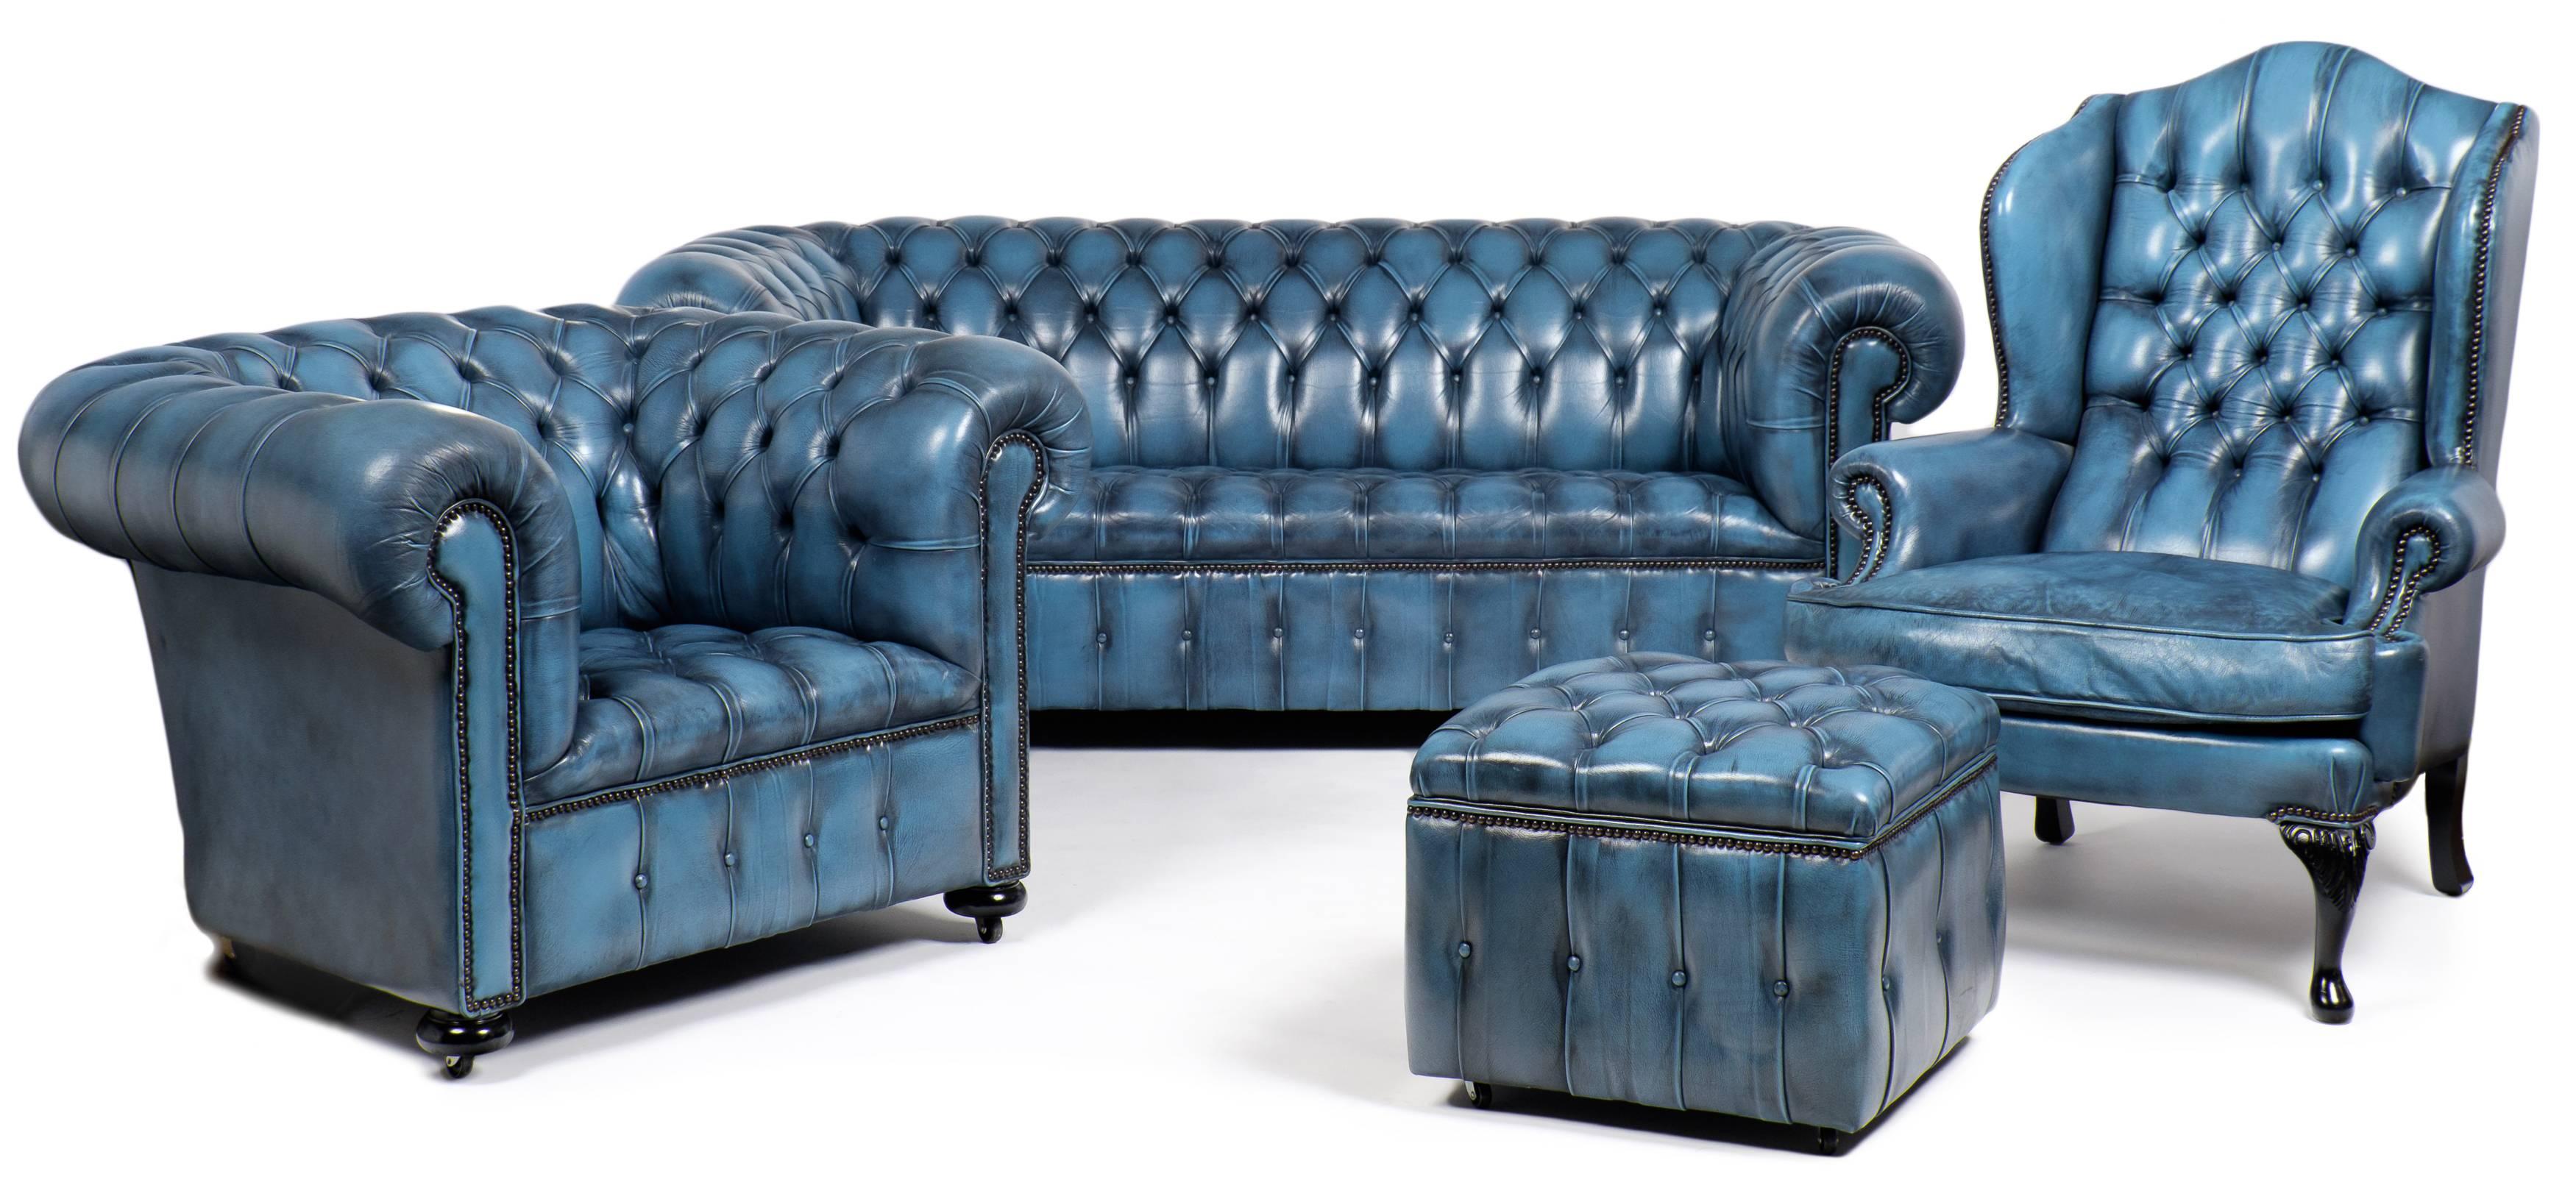 Vintage Chesterfield sofa in a rare steel blue tufted leather with bronze nailheads, on casters. Superb and so comfortable, a flawless piece with all the glam from the era.

See the matching club chair, wingback armchair and storage ottoman for